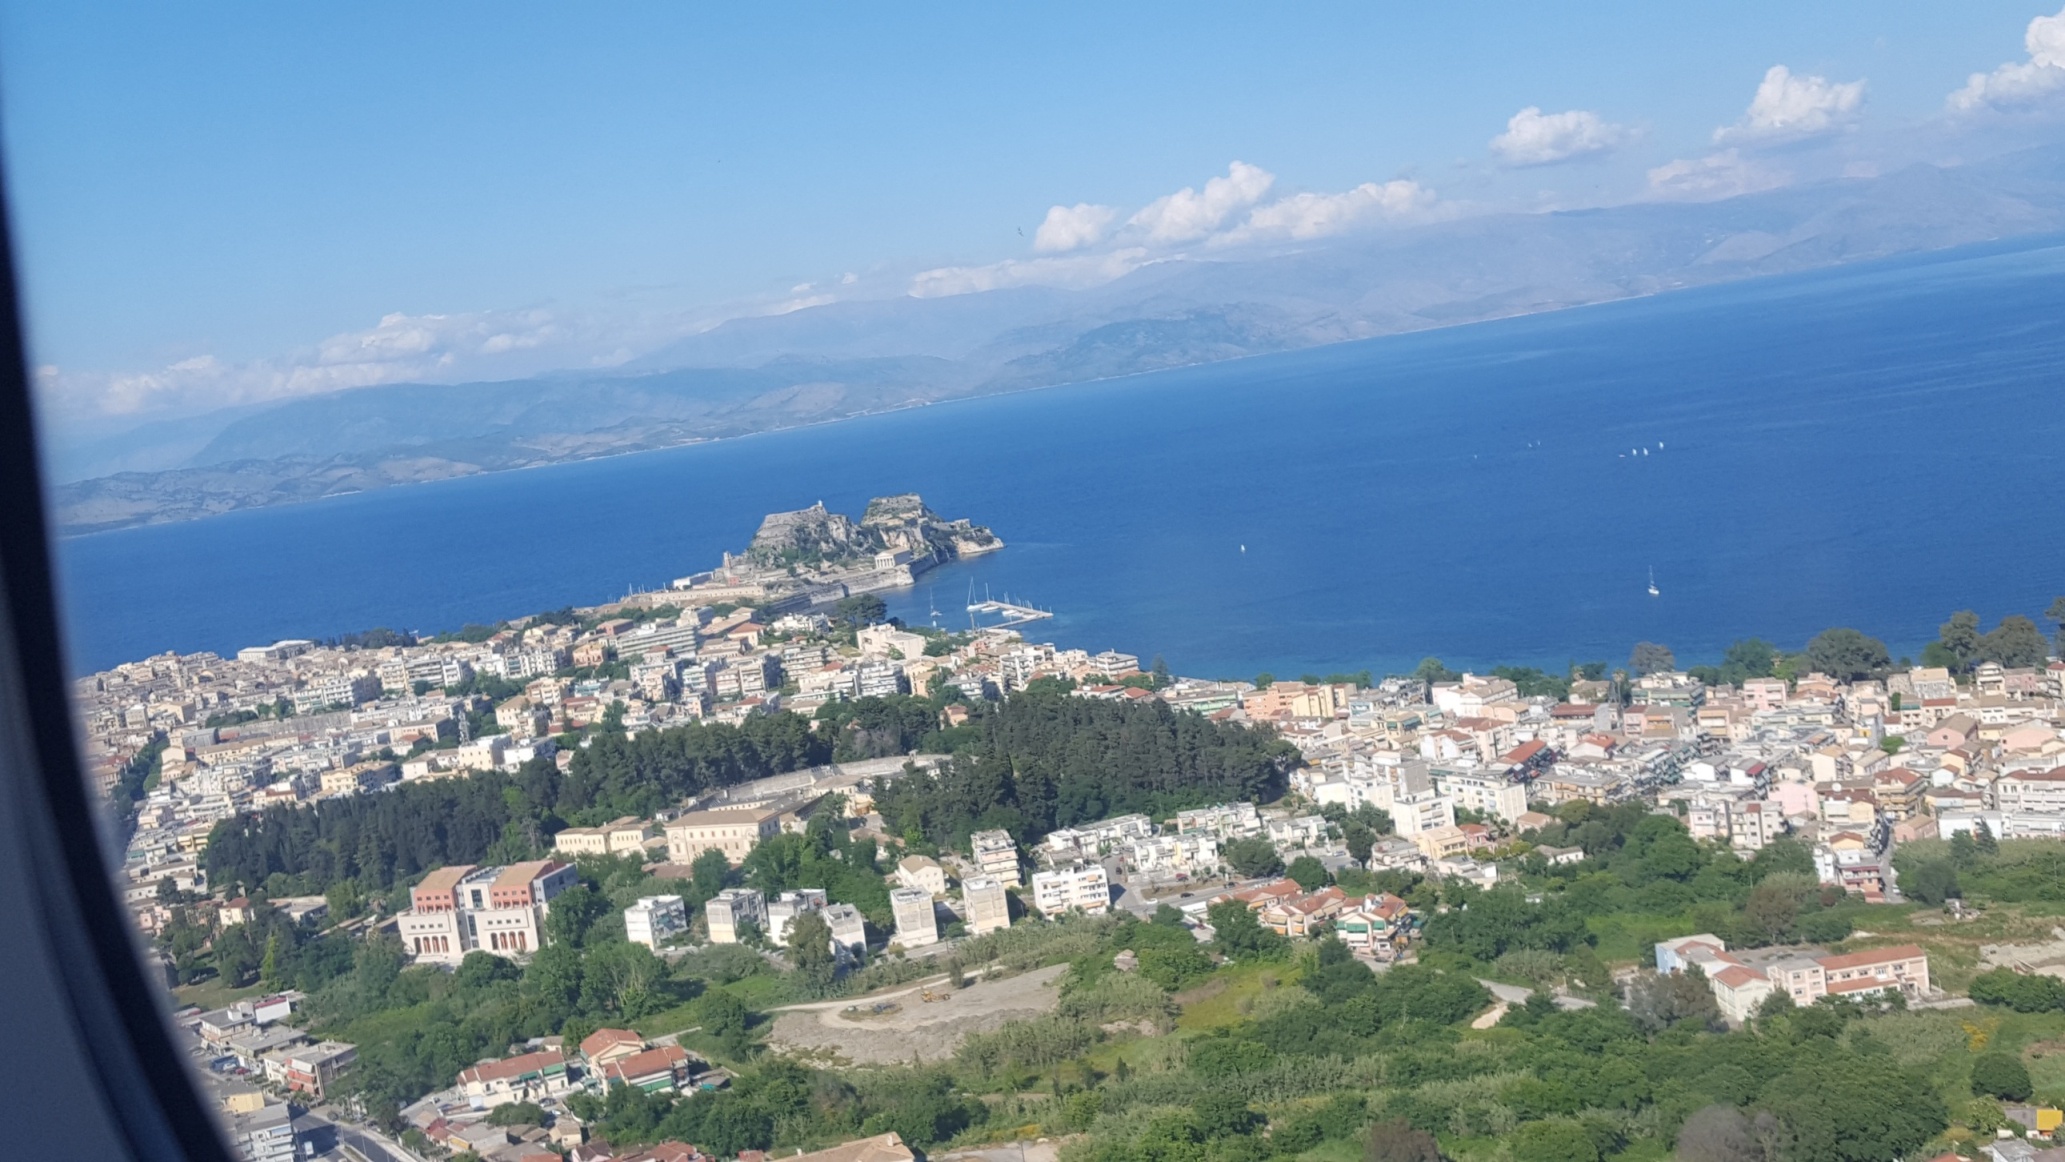 Corfu Town from the air